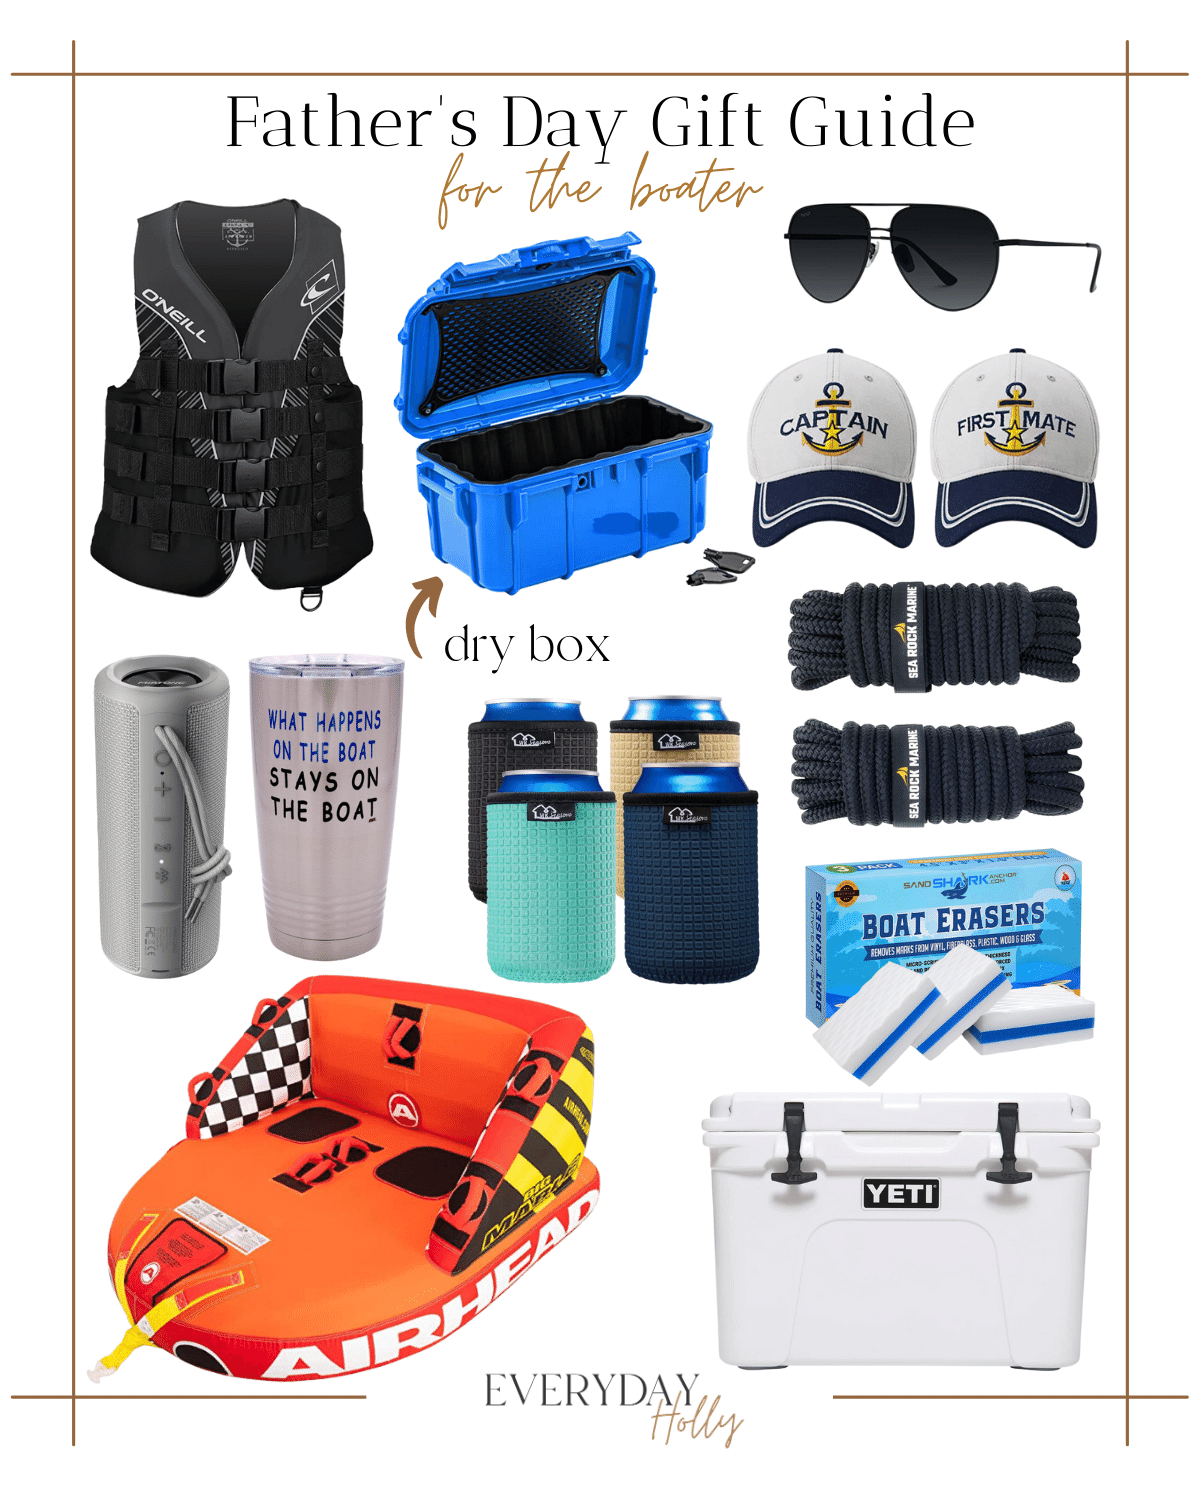 father's day gift guide, for the boater, boat man, gifts for the boat owner, cooler, dry box, life jackets, sunglasses, captain hat, rope, speaker, koozie, boat tube 